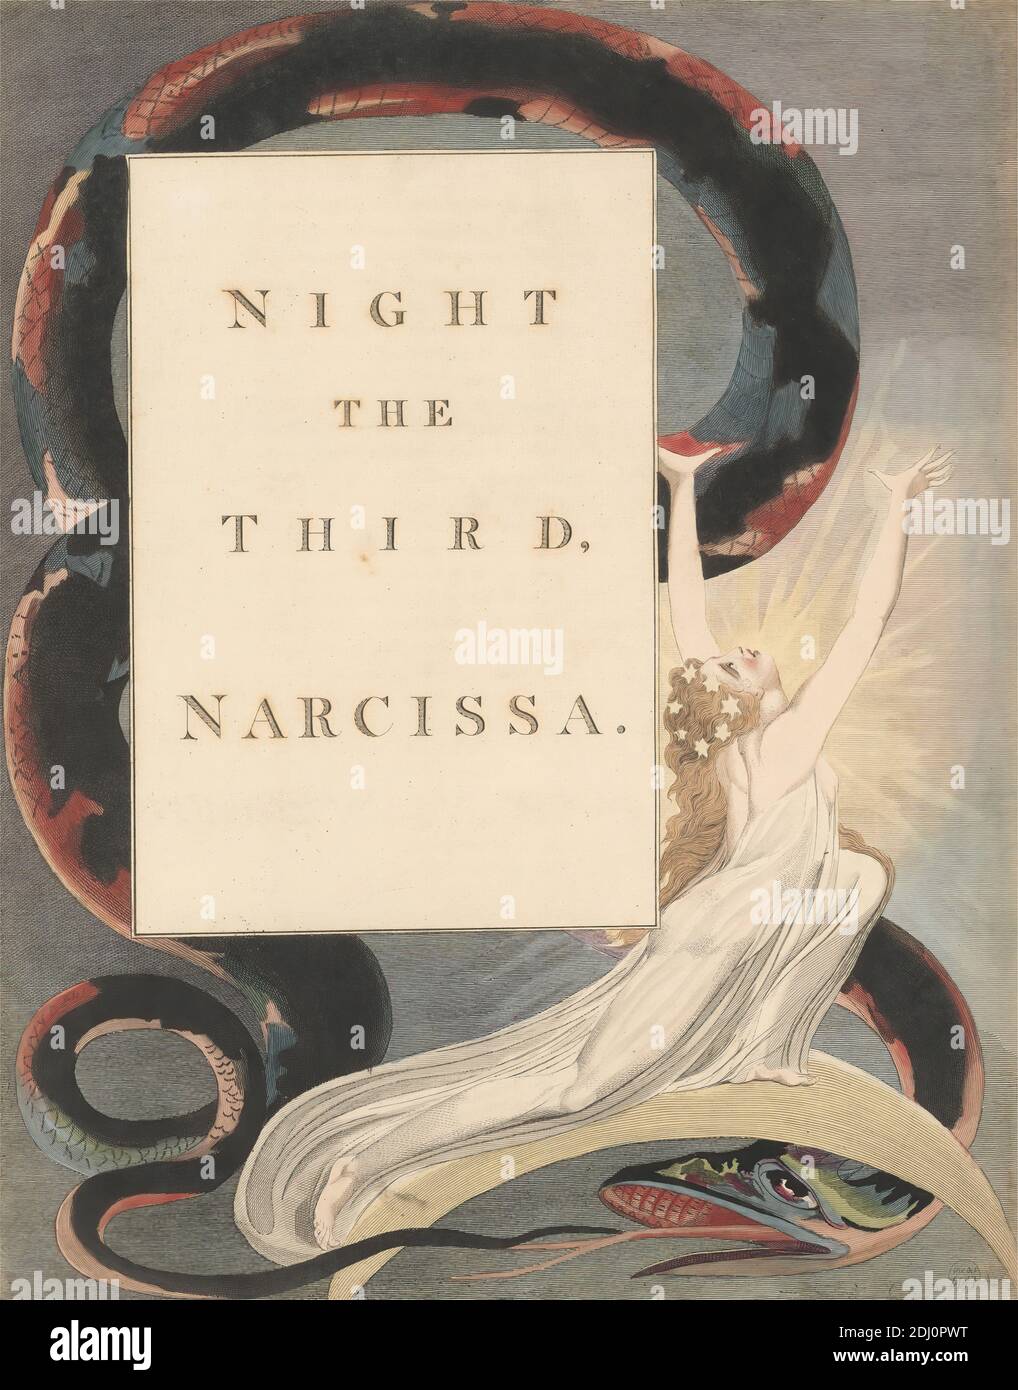 Young's Night Thoughts, Page 43, 'Night the Third, Narcissa.', Print made by William Blake, 1757–1827, British, 1797, Etching and line engraving with watercolor on moderately thick, slightly textured, cream wove paper, Spine: 17 1/2 inches (44.5 cm), Sheet: 16 1/2 x 12 7/8 inches (41.9 x 32.7 cm), and Plate: 16 1/4 x 12 7/8 inches (41.3 x 32.7 cm), gown, literary theme, religious and mythological subject, serpent, snake, stars, text, women Stock Photo